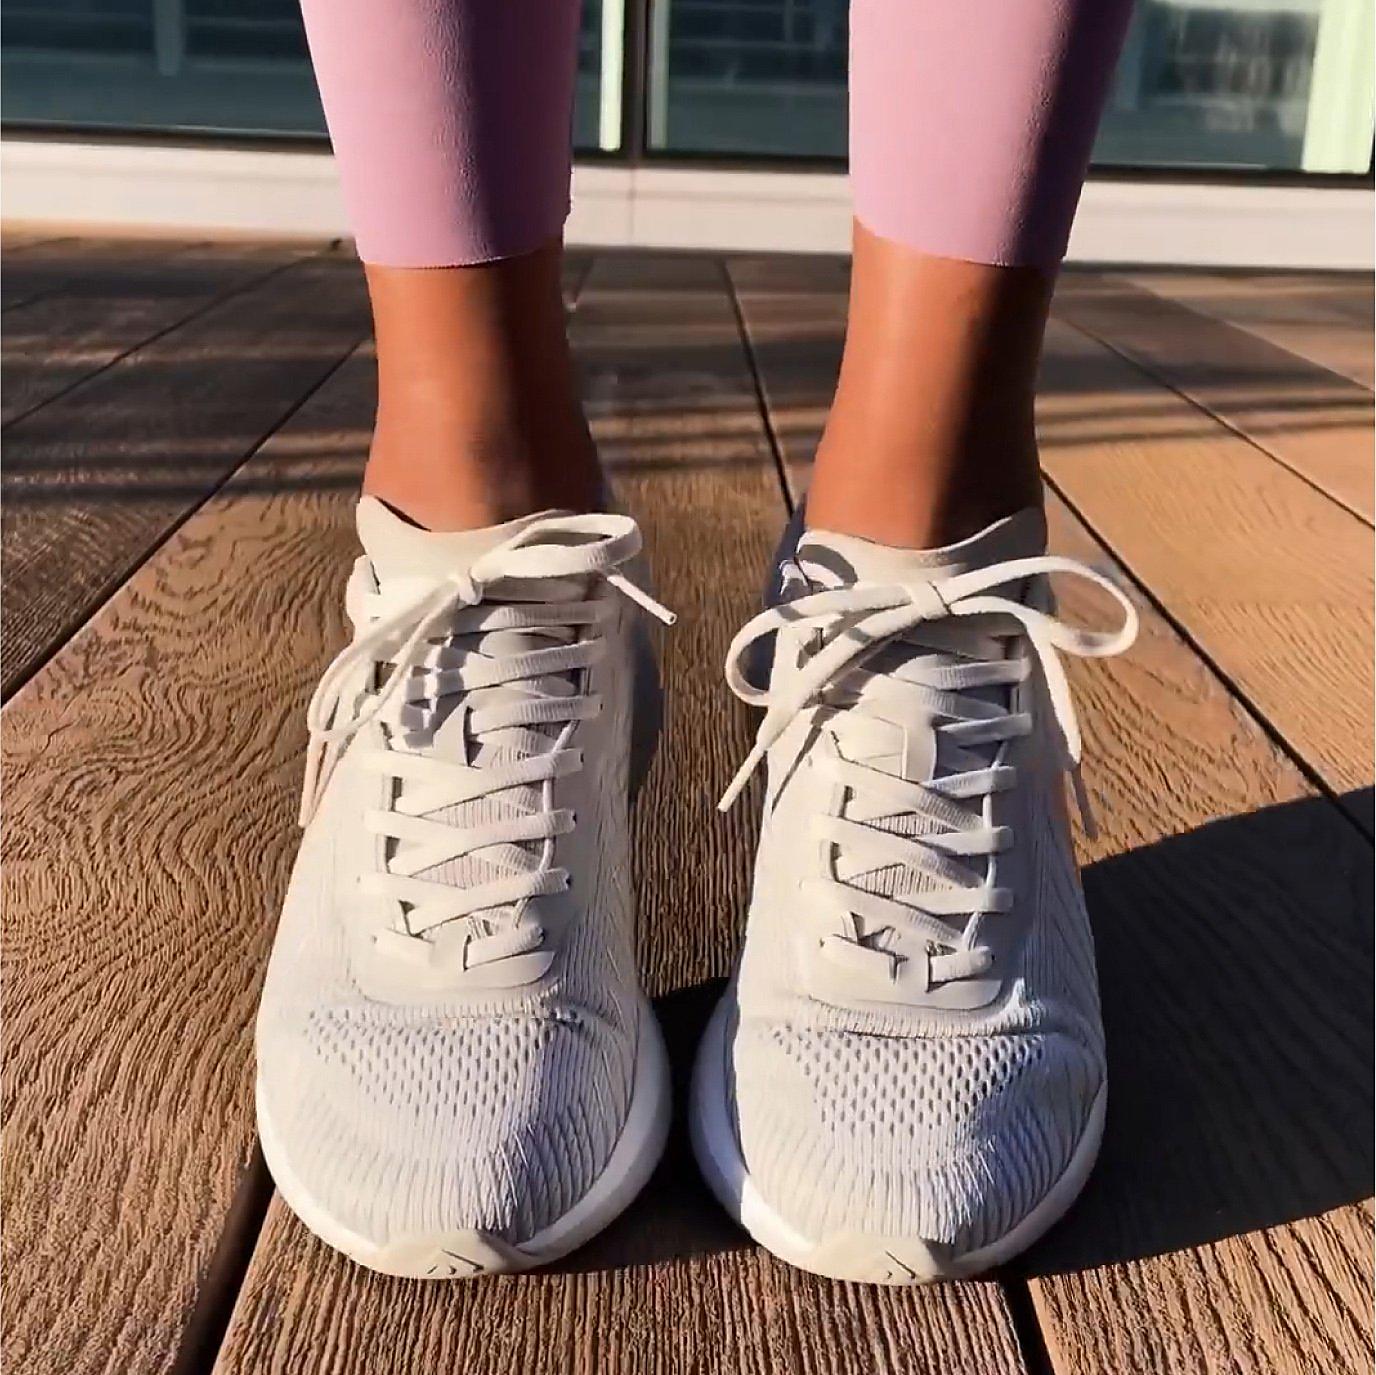 Perfect sneakers for the gym